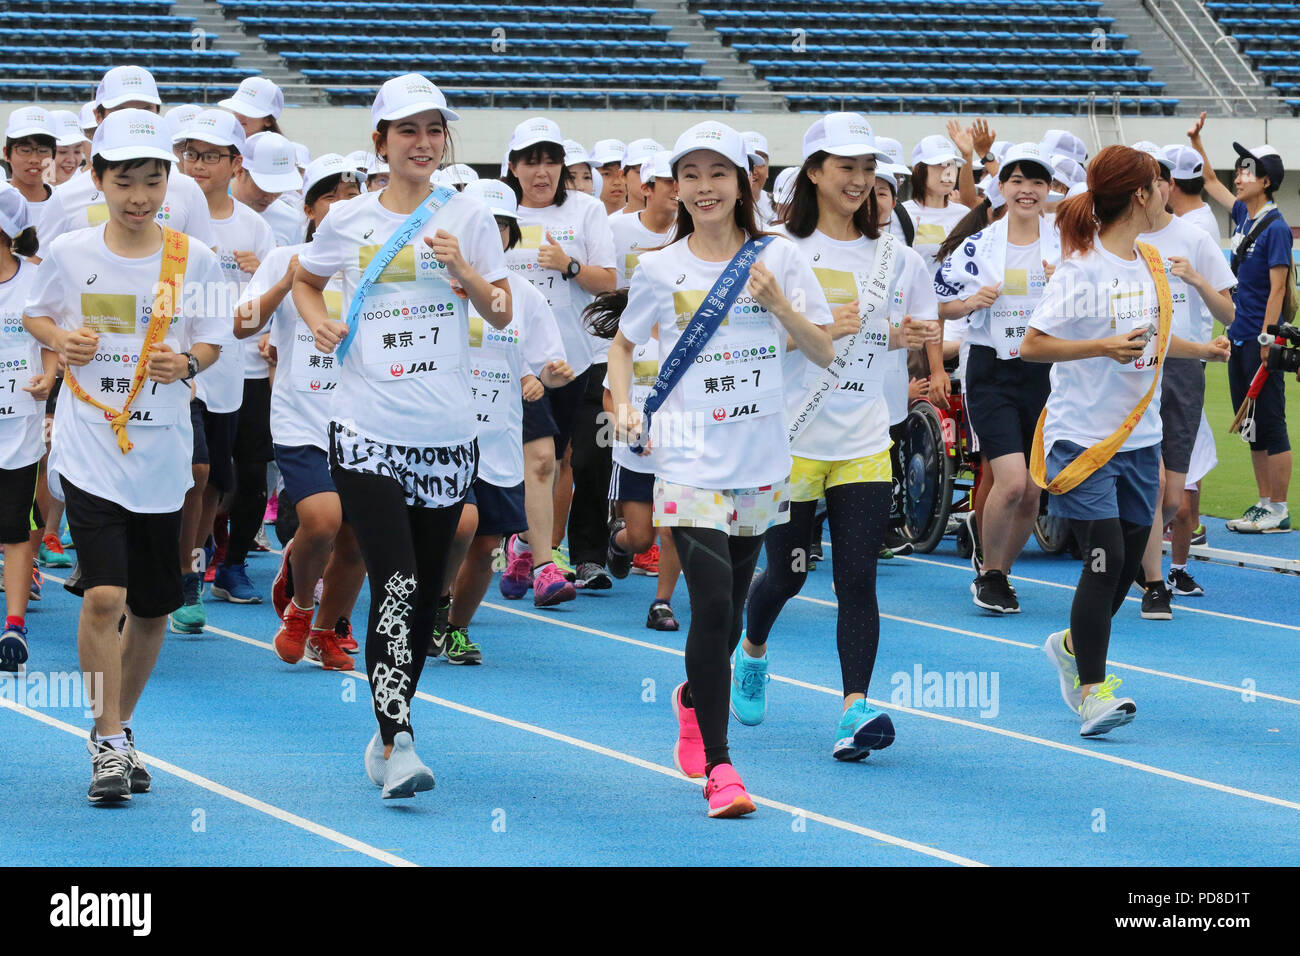 Tokyo, Japan. 7th Aug, 2018. (R-L) Japanese singer Dream Aya, Barcelona Olympics swimming gold medalist Kyoko Iwasaki, marathon runner Masako Chiba and TV personality Suzanne are on the way to finish line for the '1,000km relay to Tokyo' at the Komazawa stadium in Tokyo on Tuesday, August 7, 2018. Some 1,600 runners participated the marathon relay from Aomori to Tokyo for the commemoration of the 3.11 East Japan Great Earthquake. Credit: Yoshio Tsunoda/AFLO/Alamy Live News Stock Photo